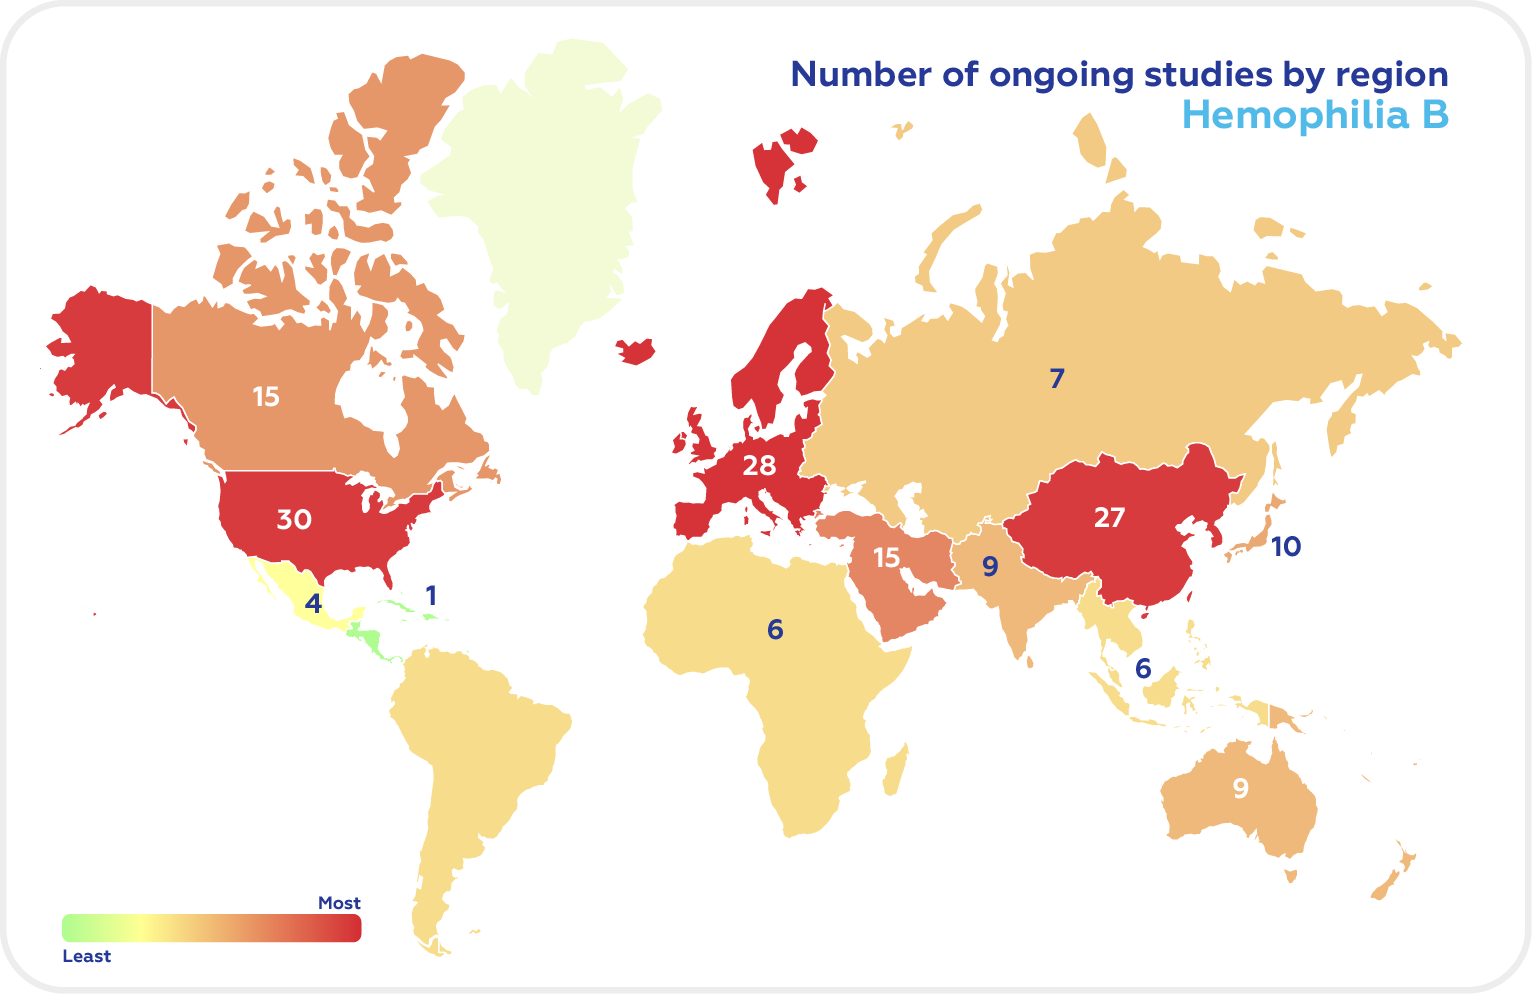 Number of ongoing studies by region B